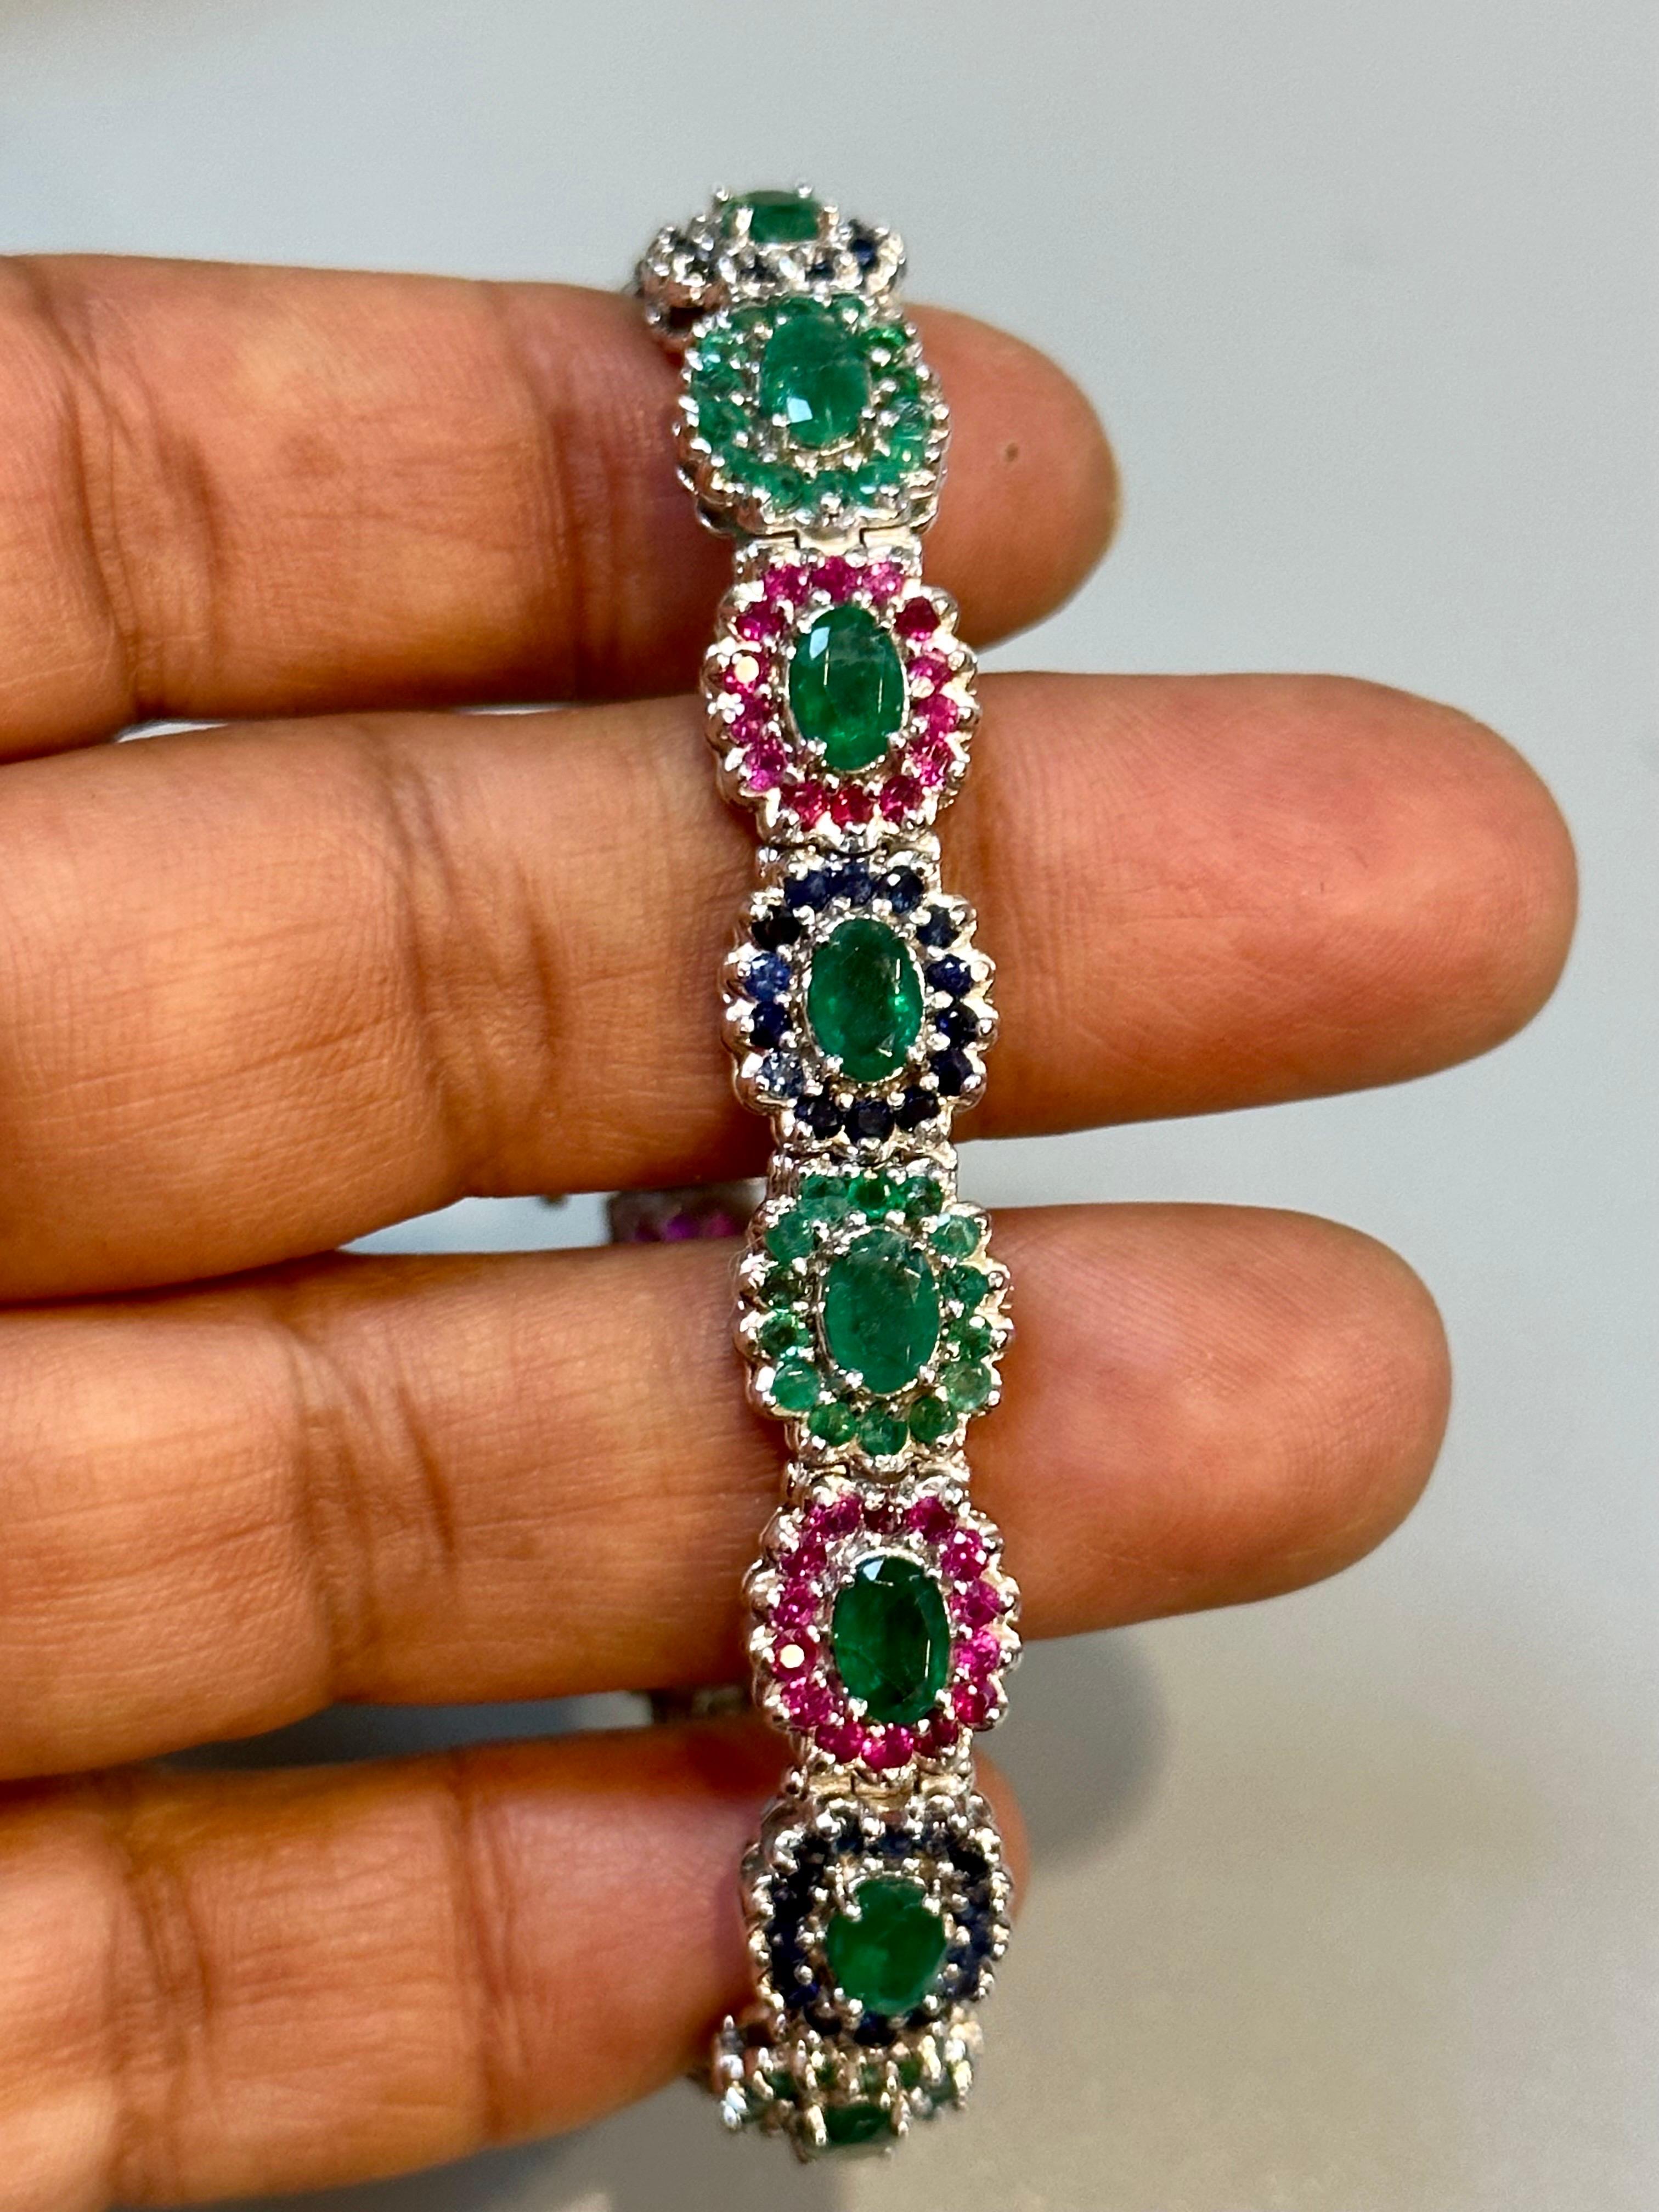 8 Ct Oval Cut Emerald & Ruby & Sapphire Tennis Bracelet 14 Kt White Gold 25.5Gm For Sale 7